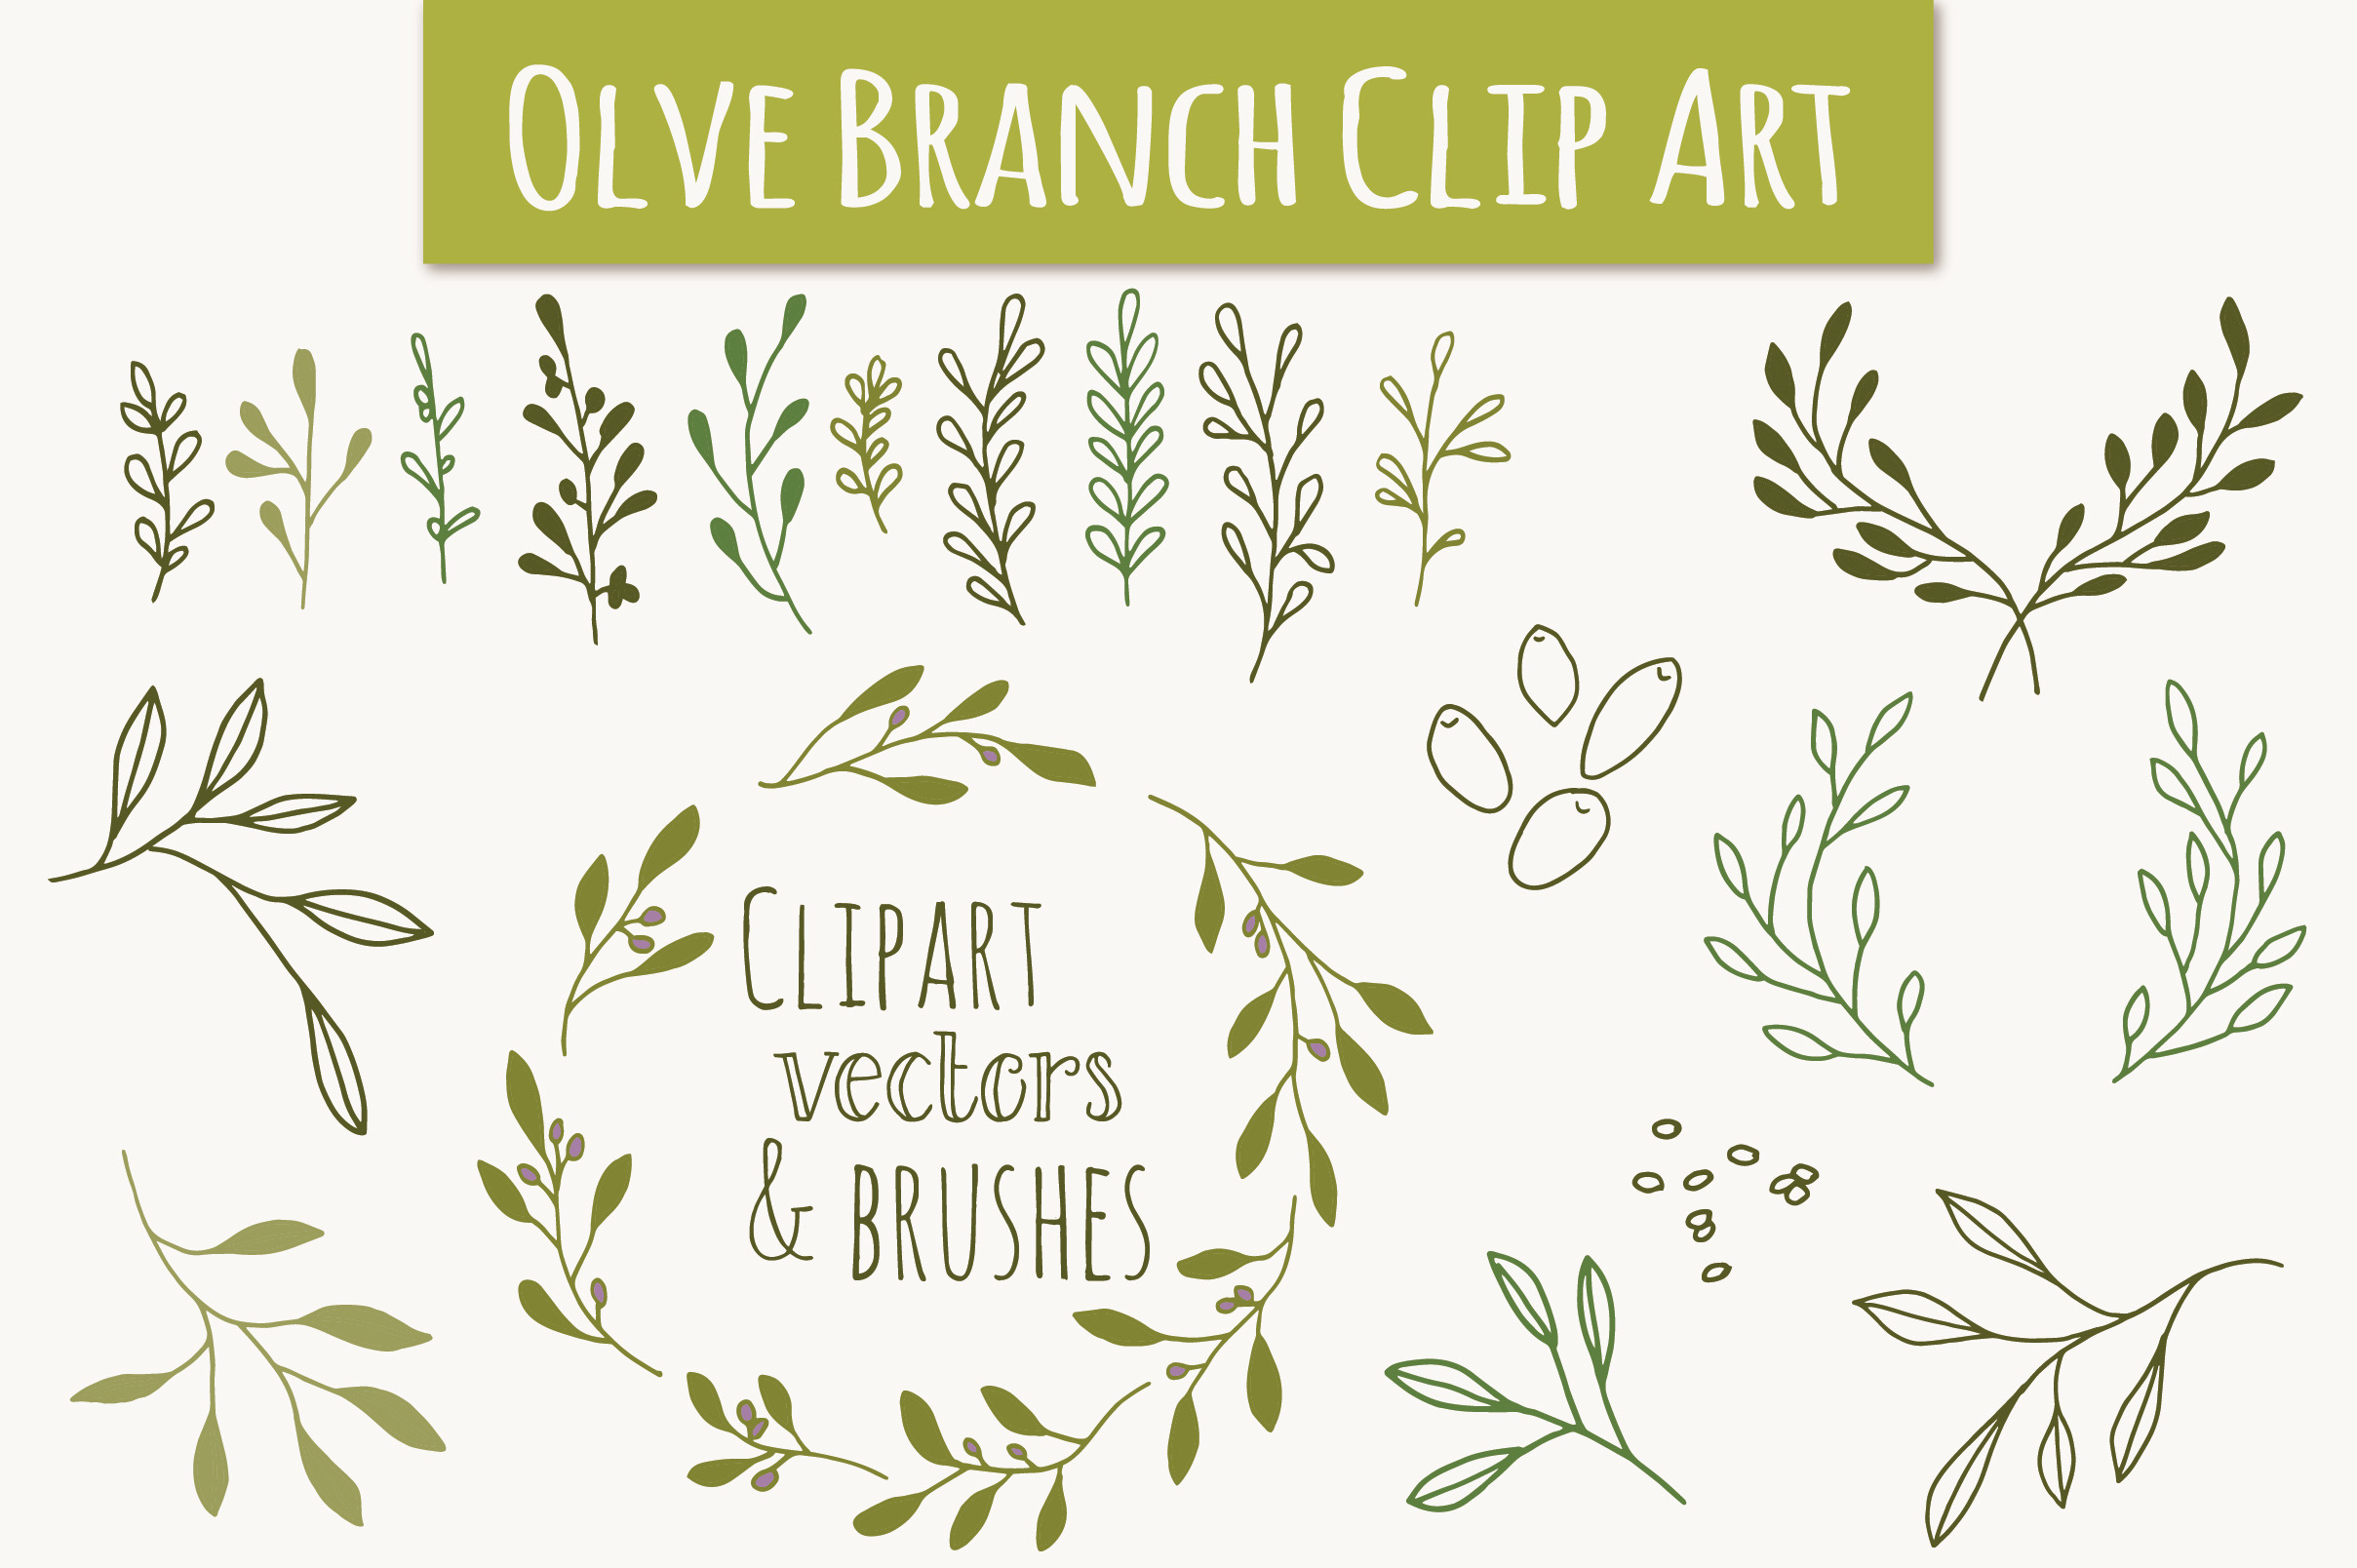 Olive Branch Clip Art & Vectors, a Graphic by The Pen and Brush